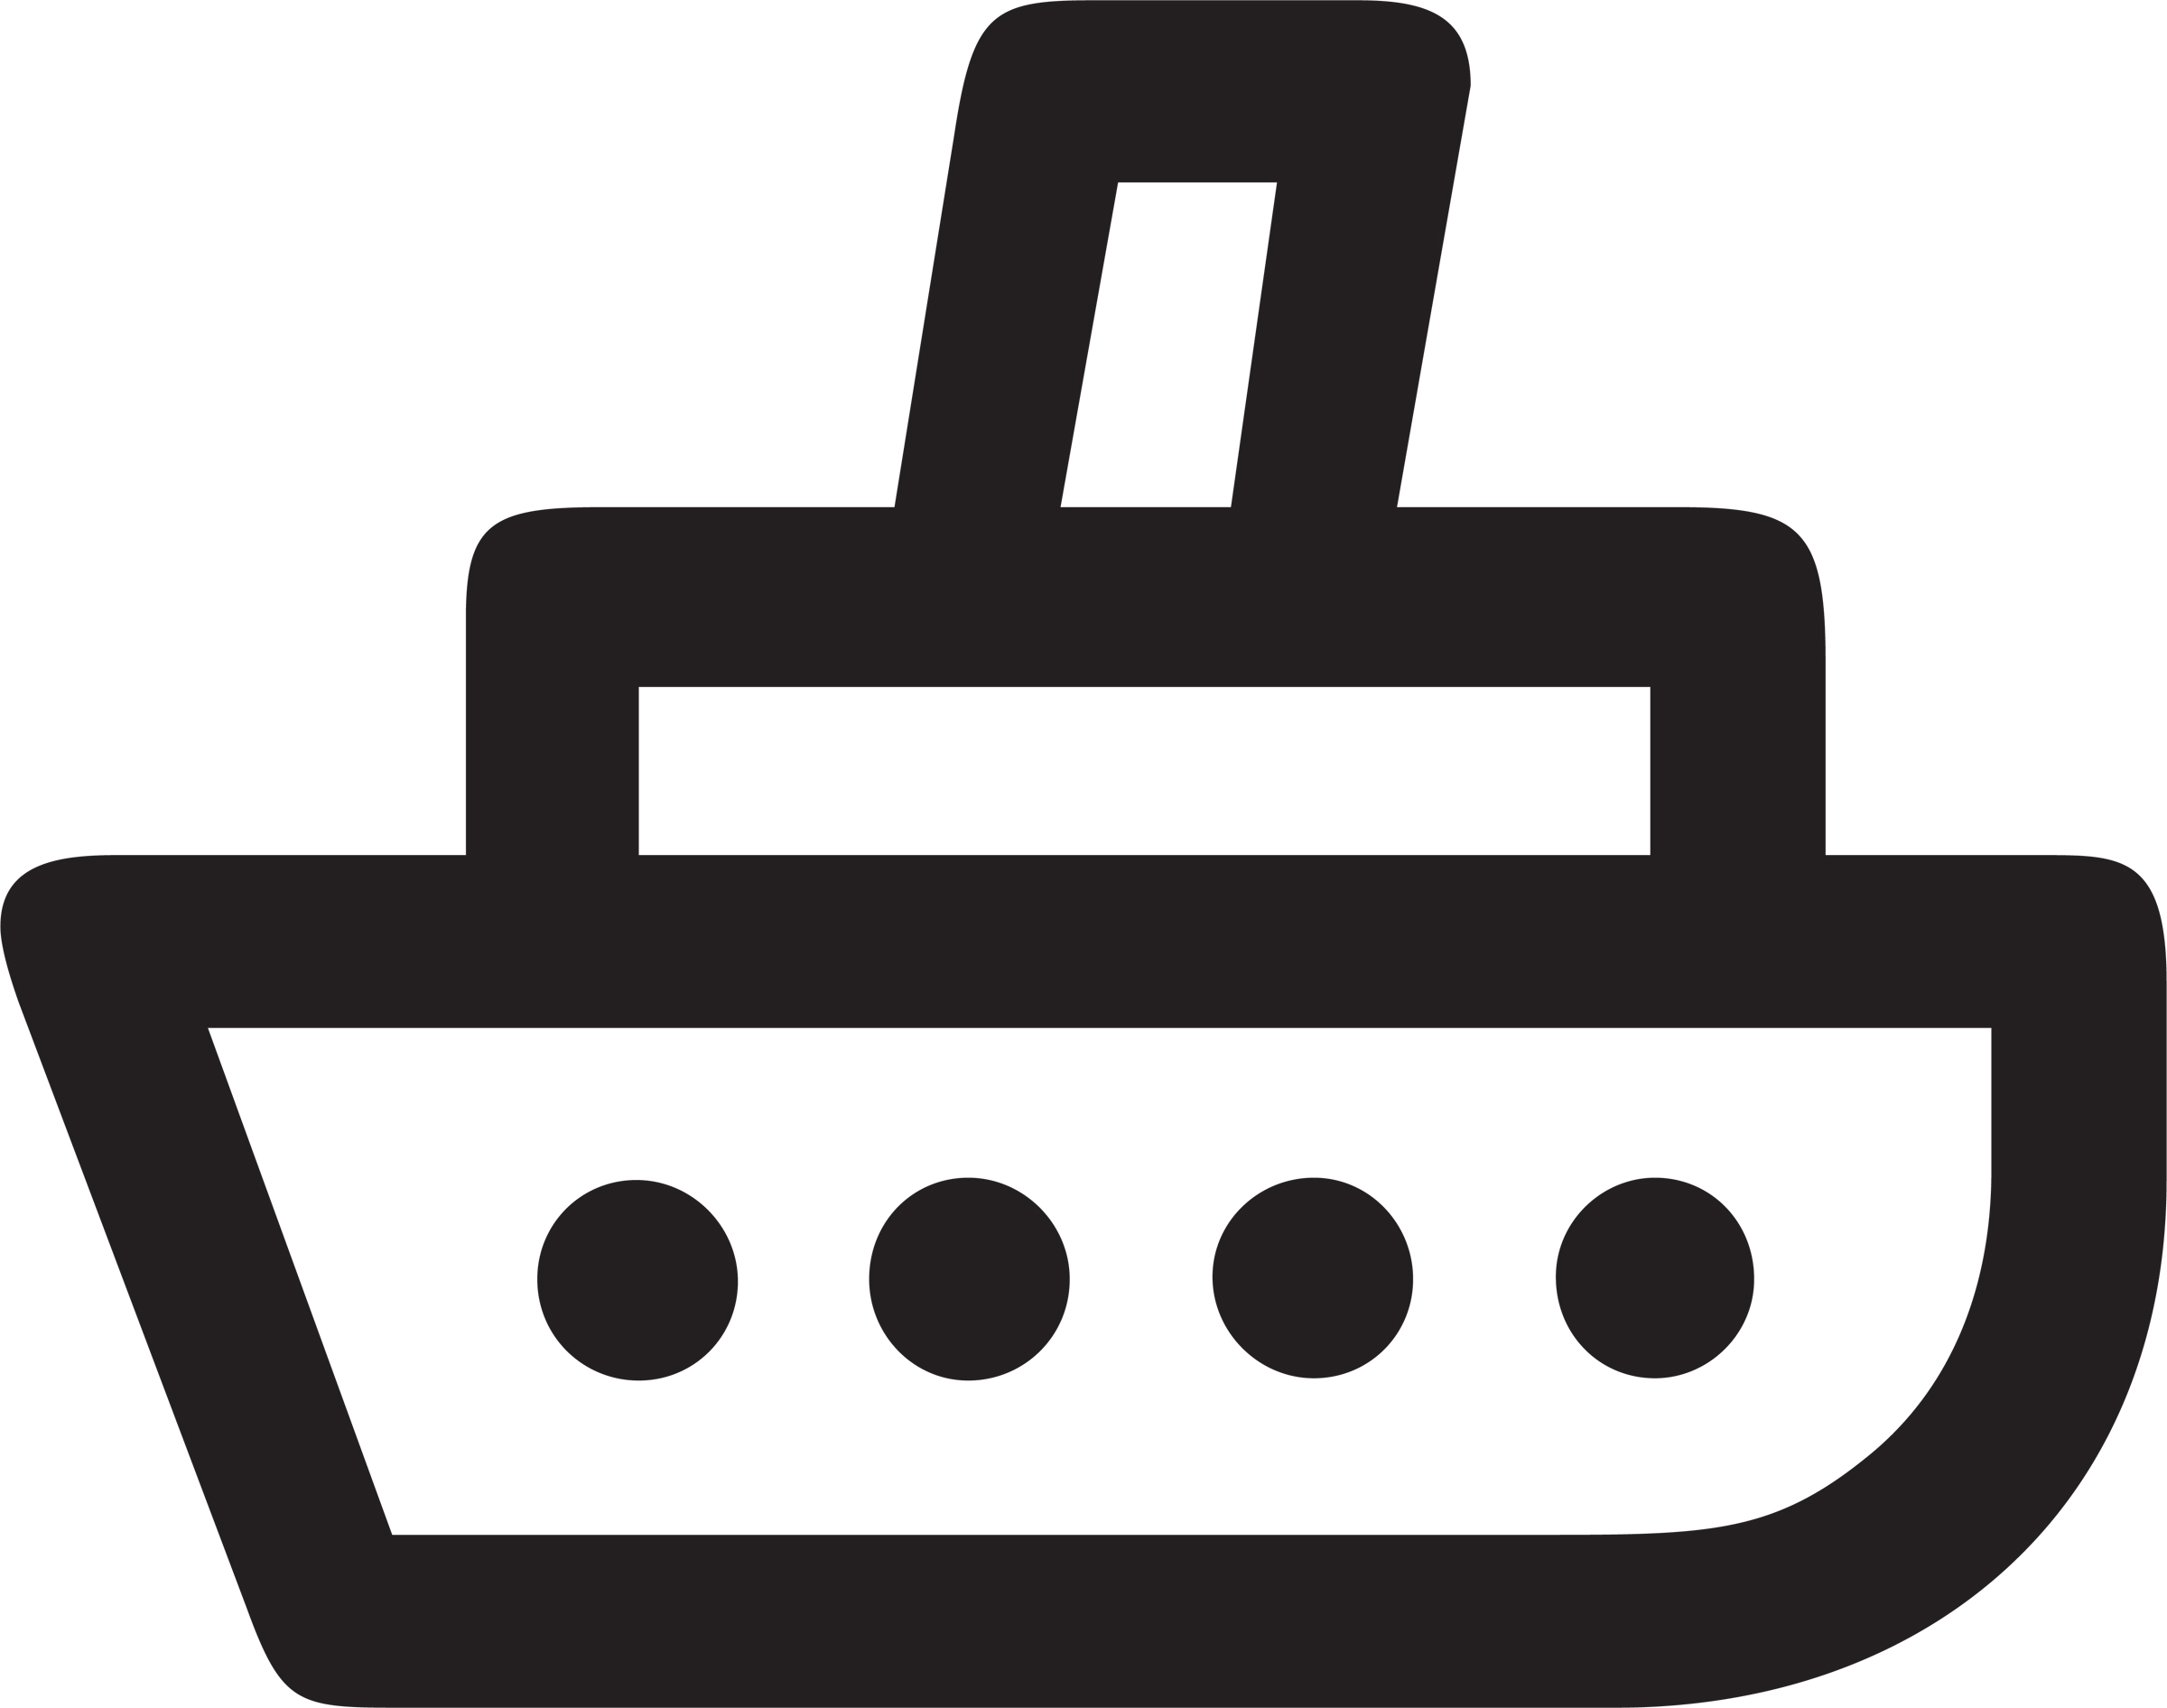 Pin Tugboat Clipart Black And White #1 - Tugboat Black And White, Transparent background PNG HD thumbnail